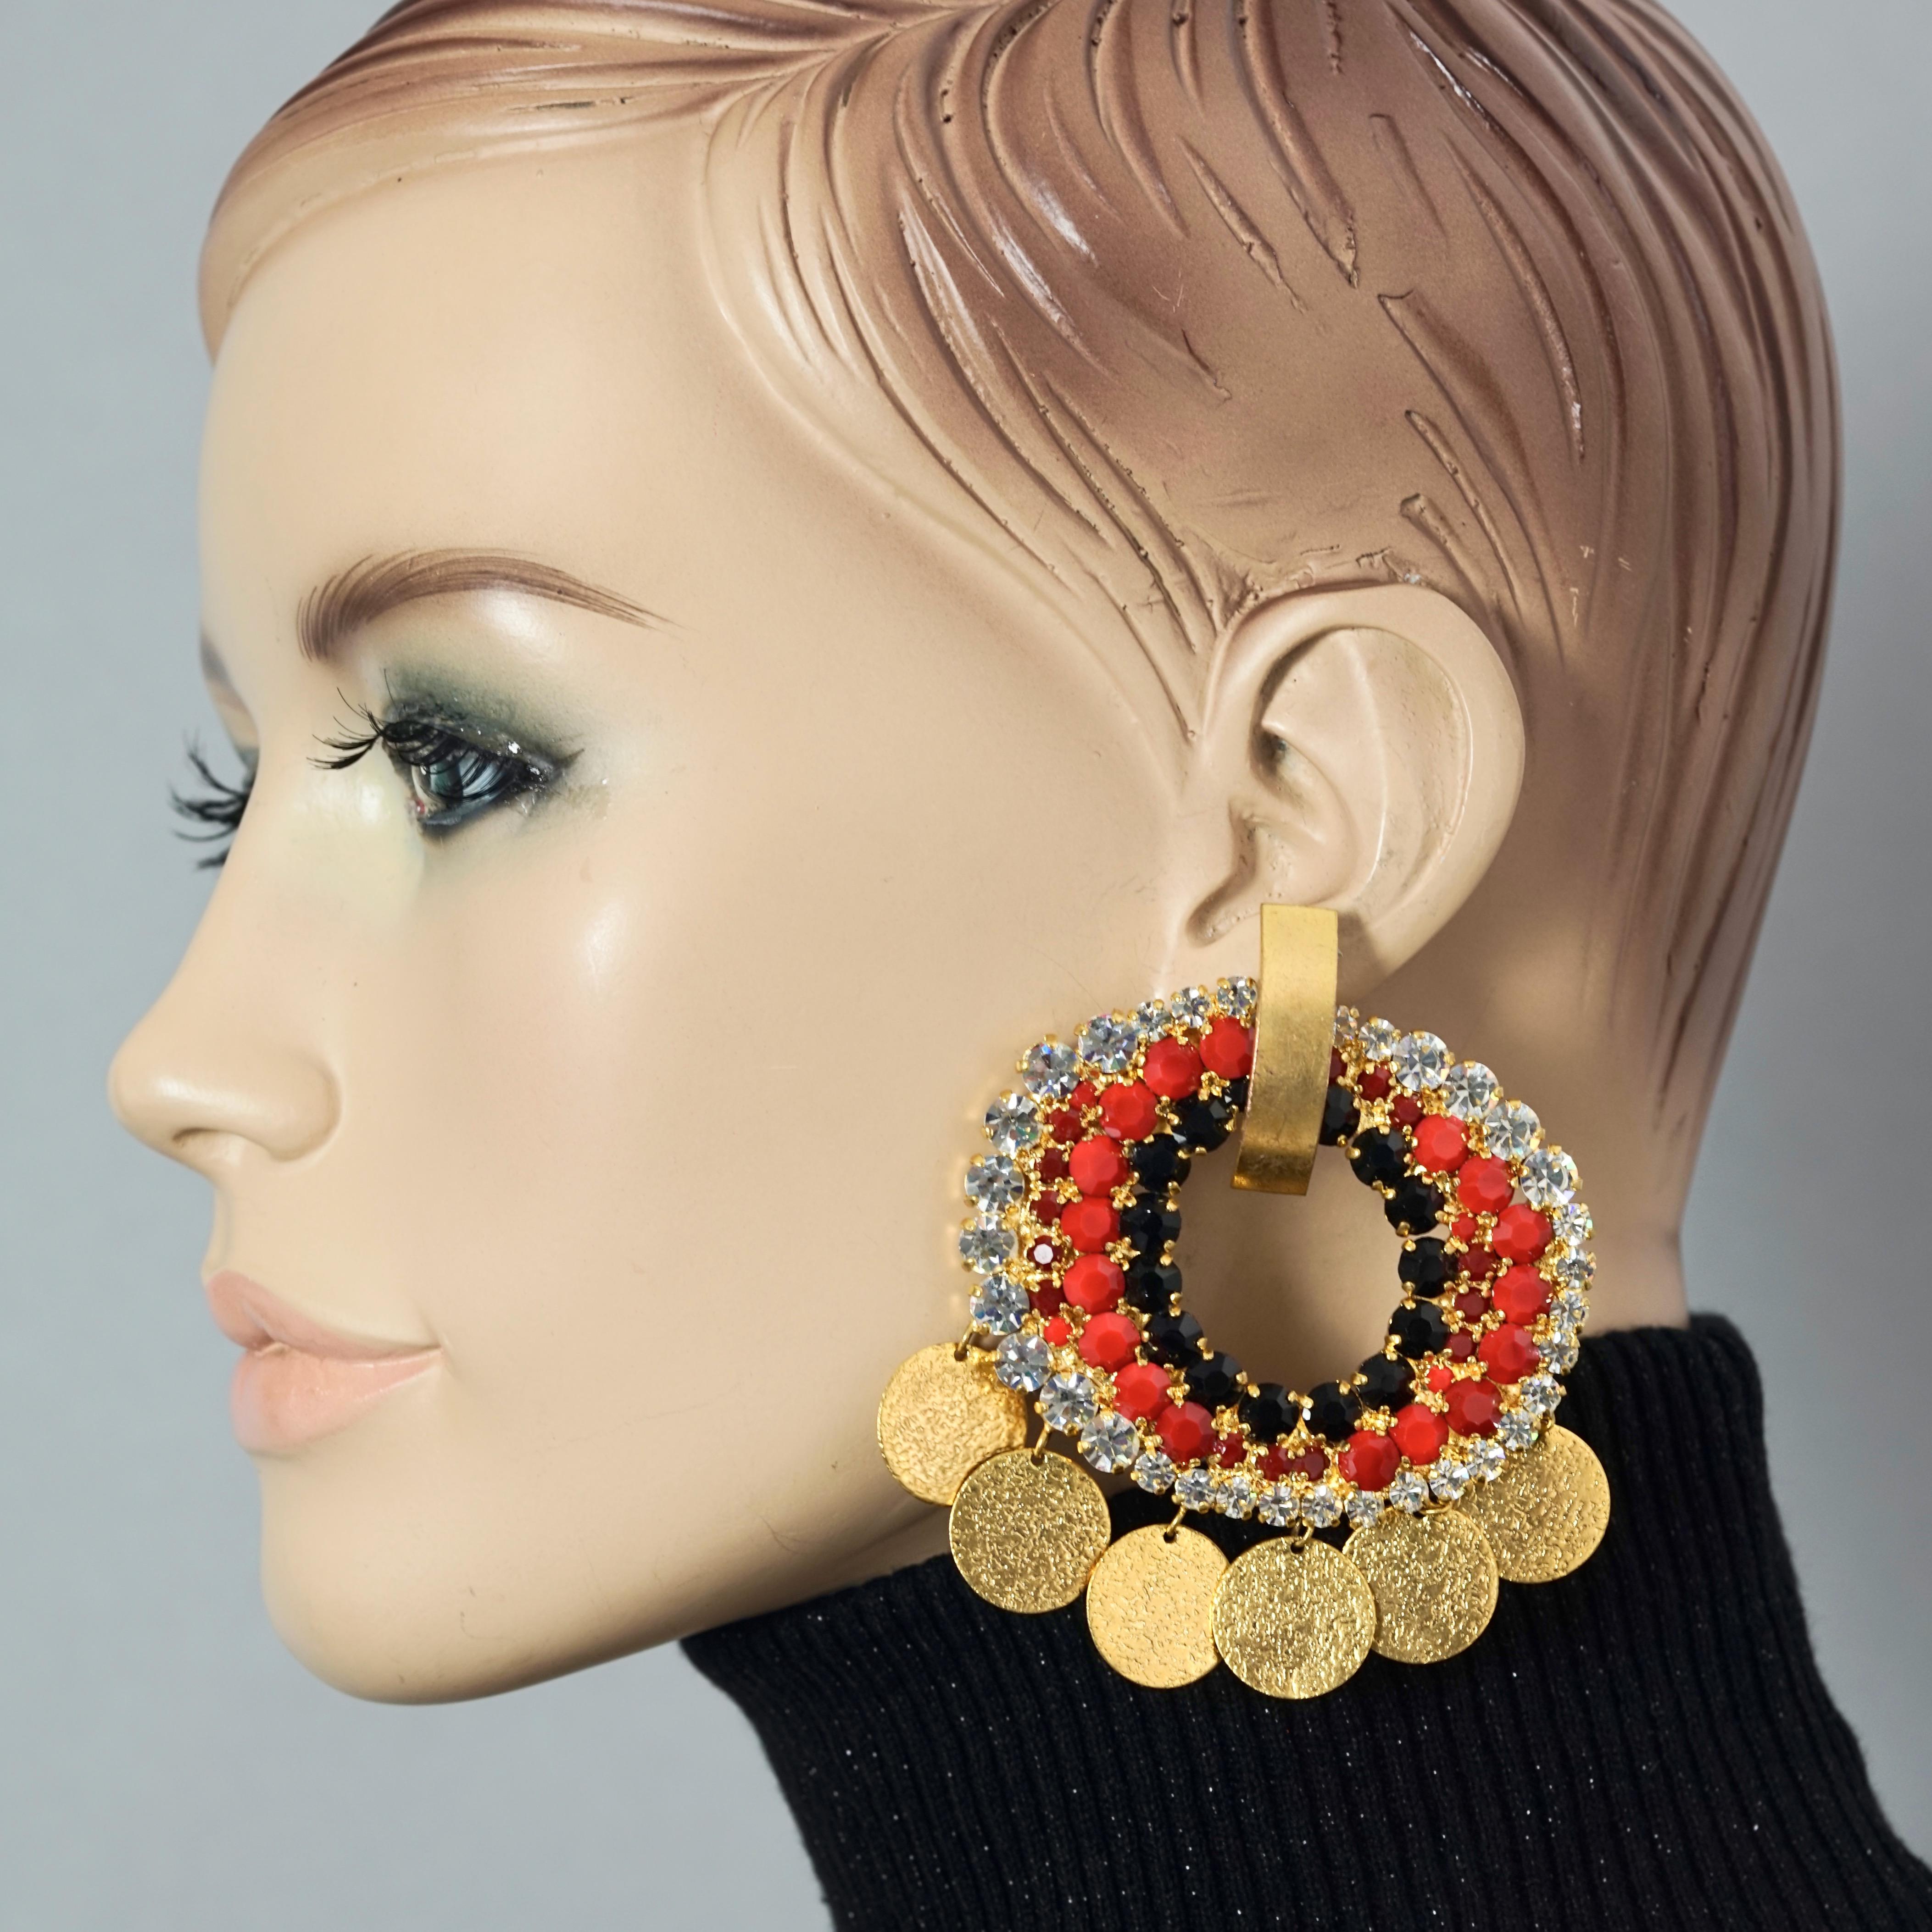 Vintage French Mogul Rhinestone Disc Charm Creole Hoop Earrings

Measurements:
Height: 3.15 inches (8 inches)
Width: 3.22 inches (8.2 inches)
Weight per Earrings: 38 grams

Features:
- Massive French dangling hoop earrings with disc charms.
-